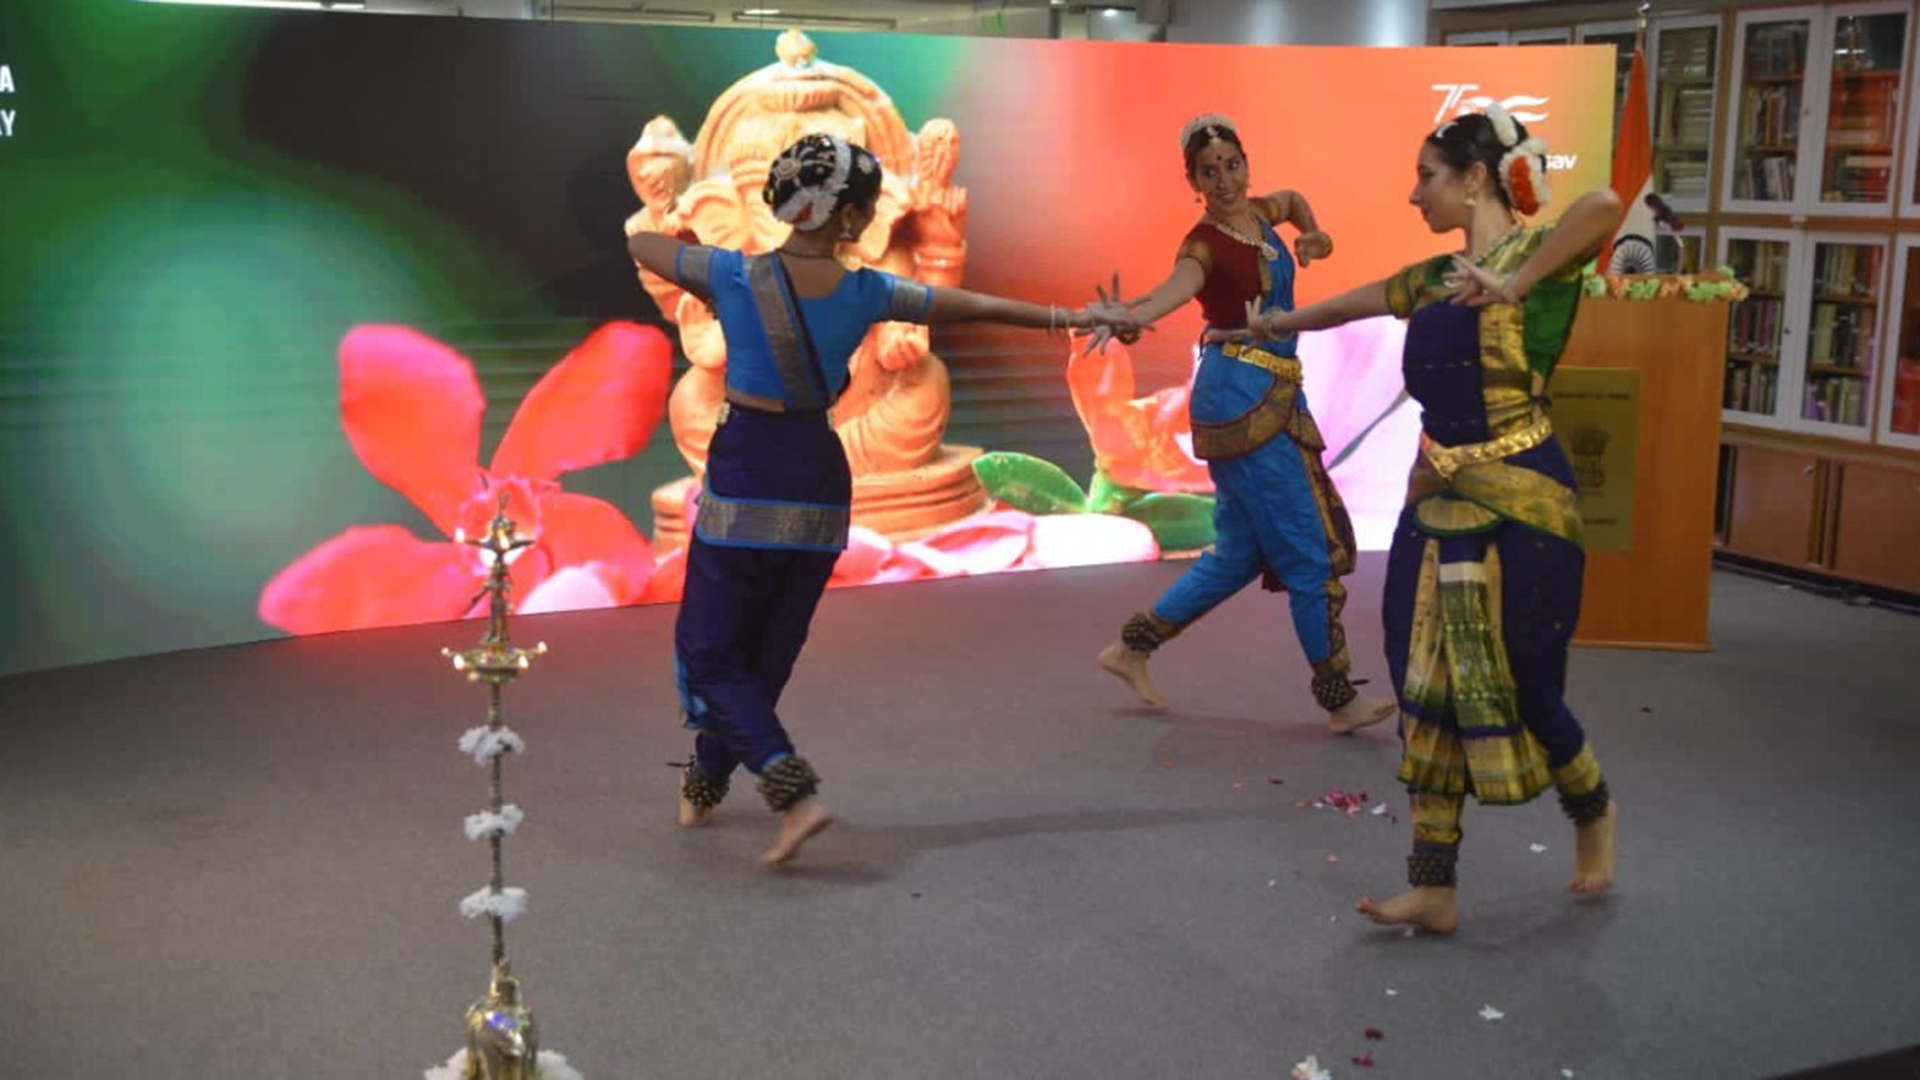 The Kungoor Dance School performed a traditional dance called Pushpanjali (Courtesy: Indian Embassy in Argentina).